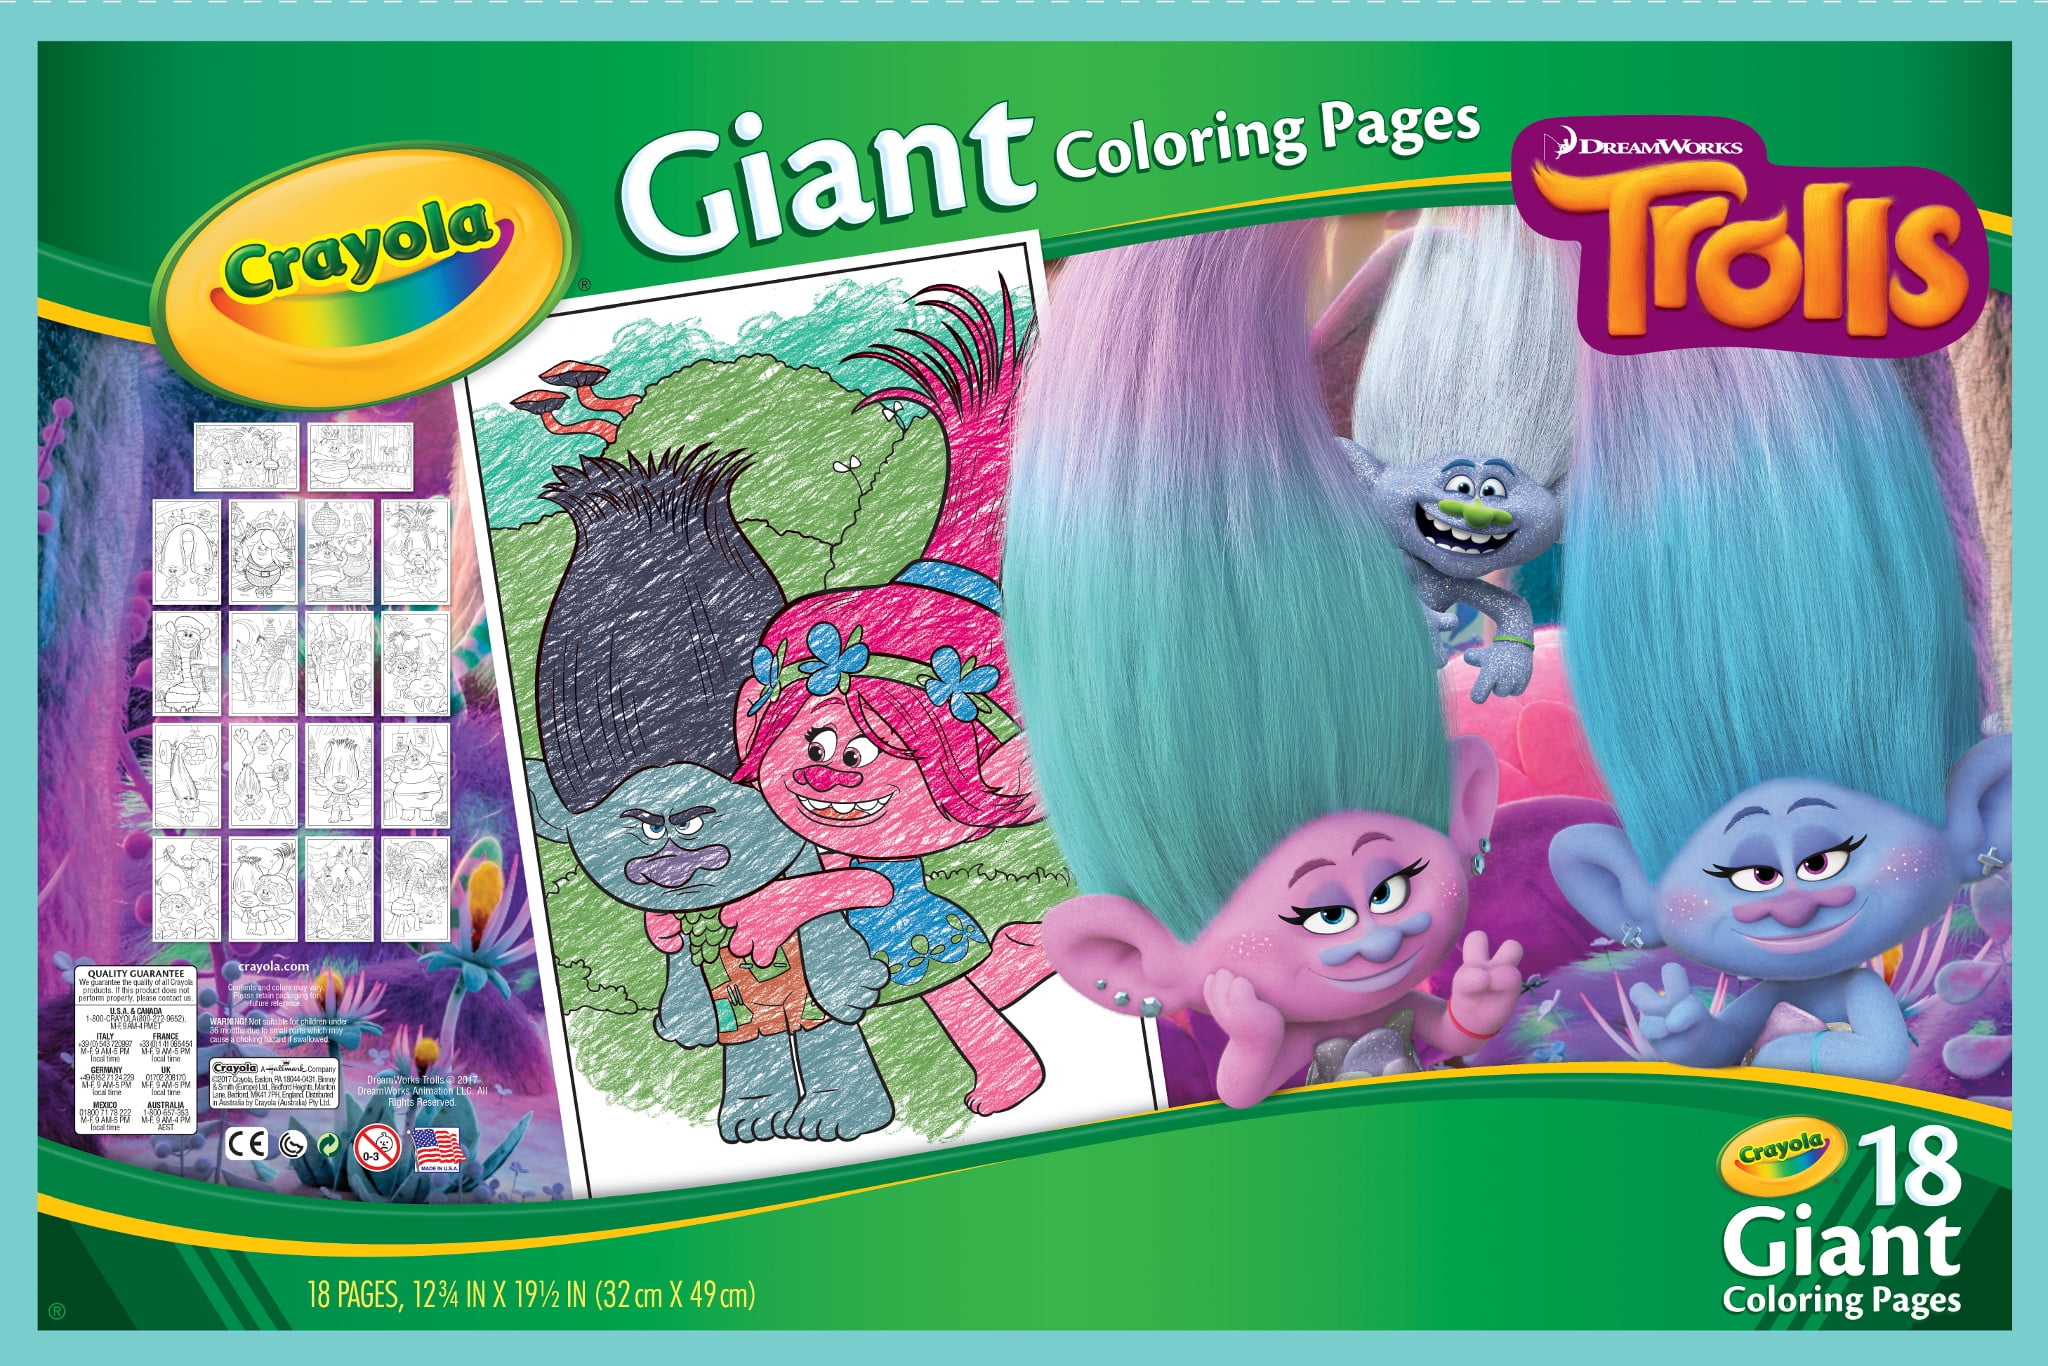 8800 Crayola Giant Coloring Pages Trolls  Images